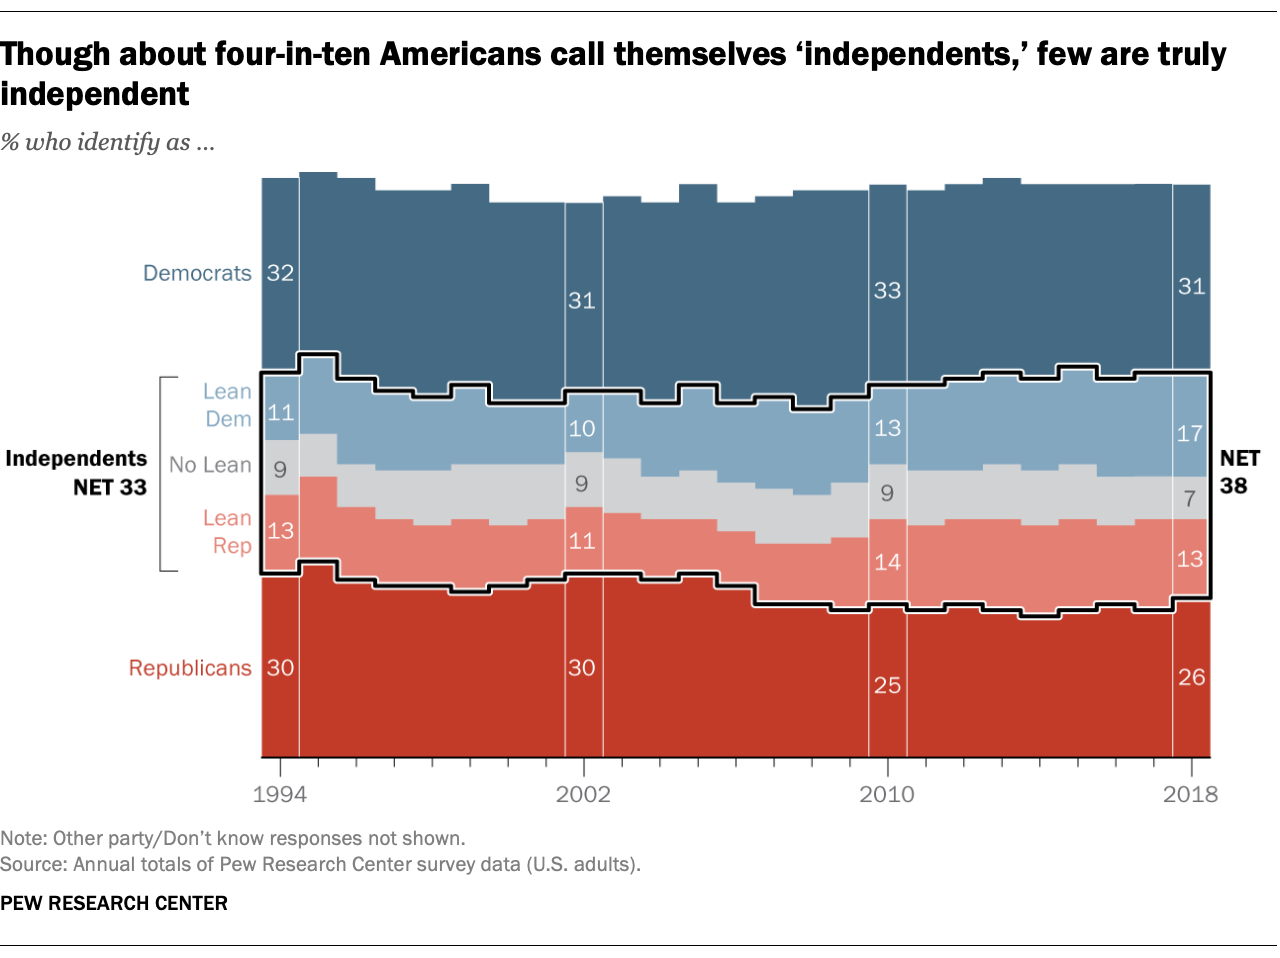 Though about four-in-ten Americans call themselves 'independents,' few are truly independent